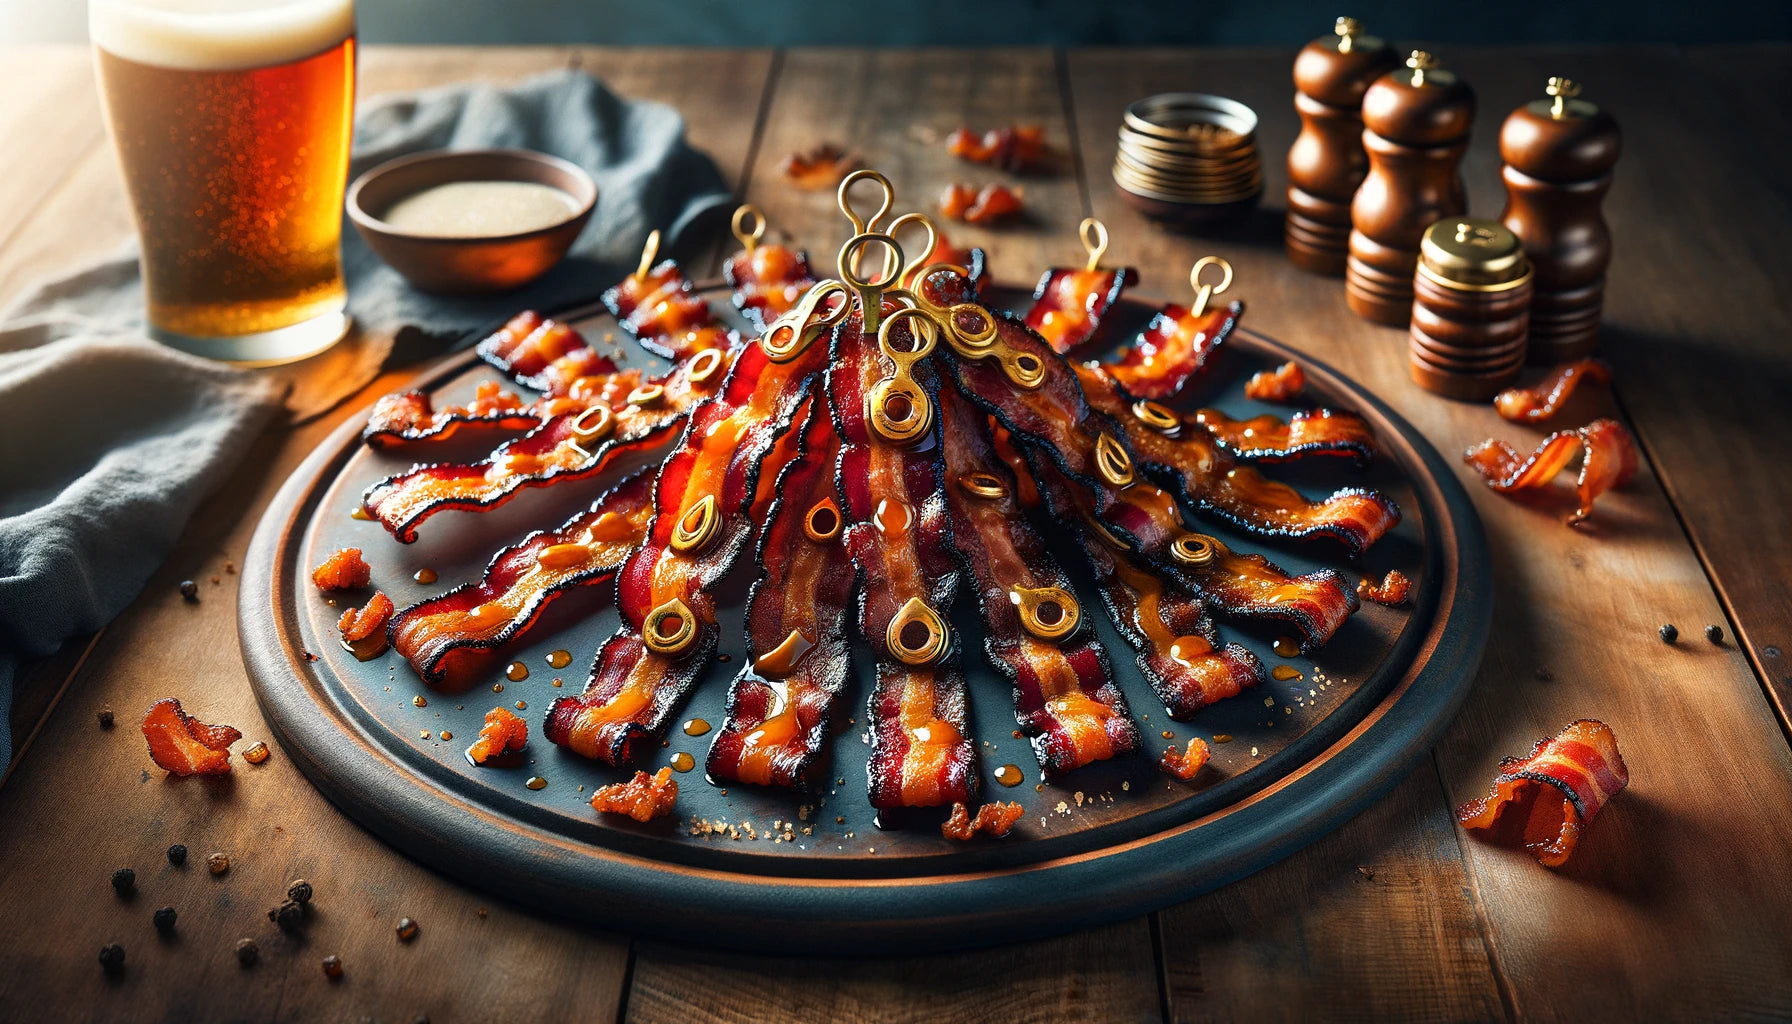 Beer Candied Bacon, highlighting the caramelized crispness and the beautiful balance of sweet, savory, and beer-infused flavors